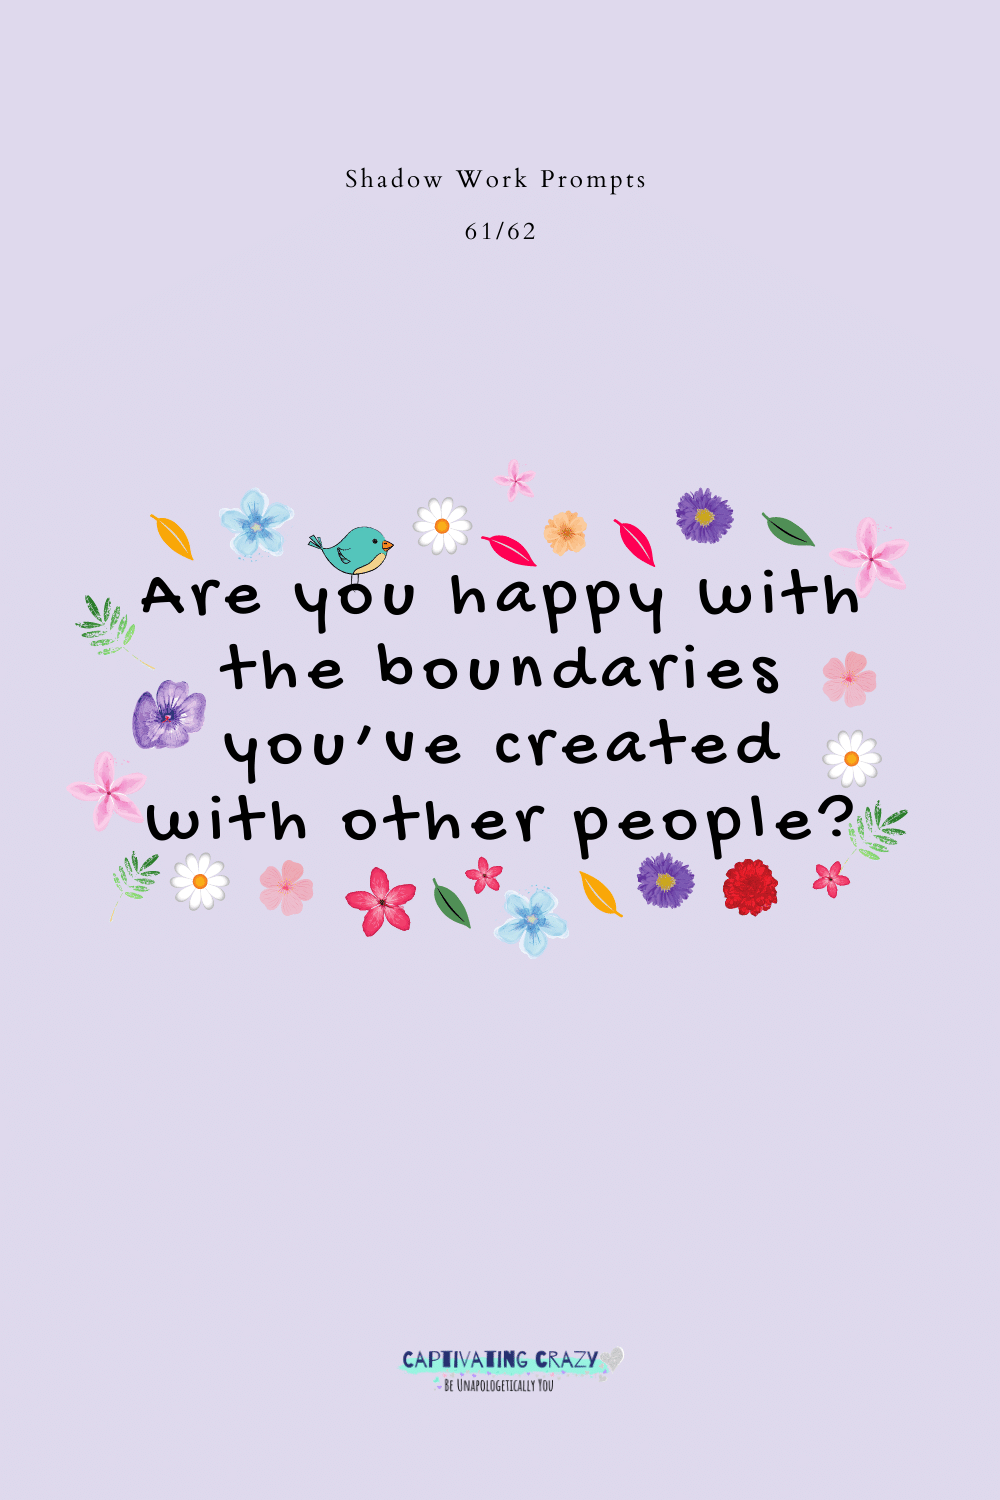 Are you happy with the boundaries you've created with other people?